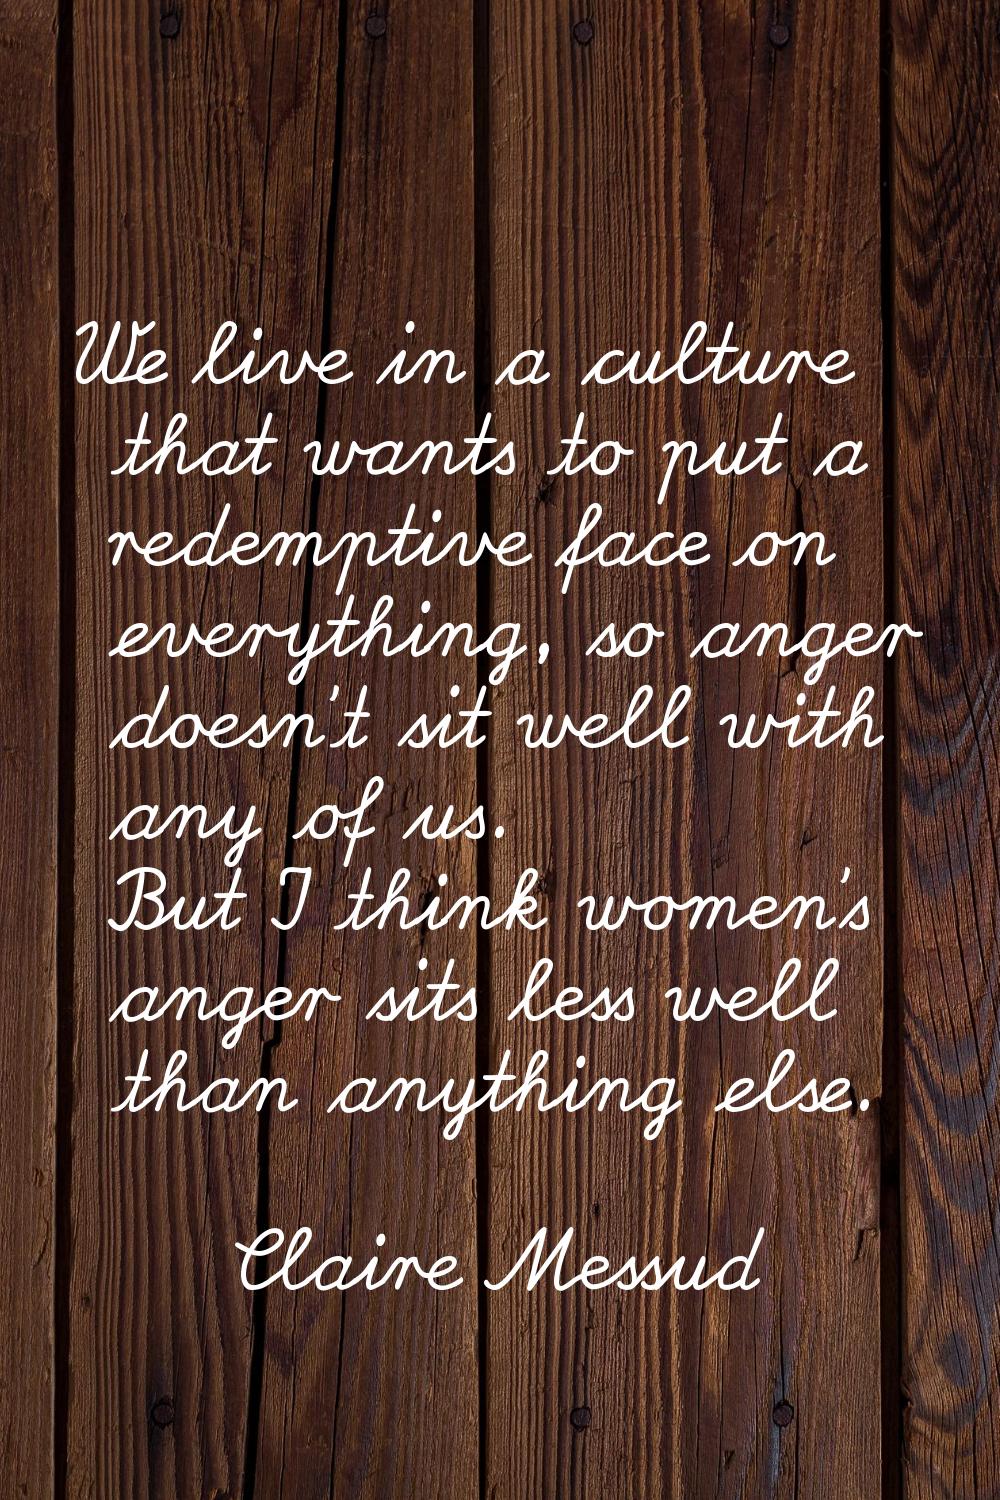 We live in a culture that wants to put a redemptive face on everything, so anger doesn't sit well w